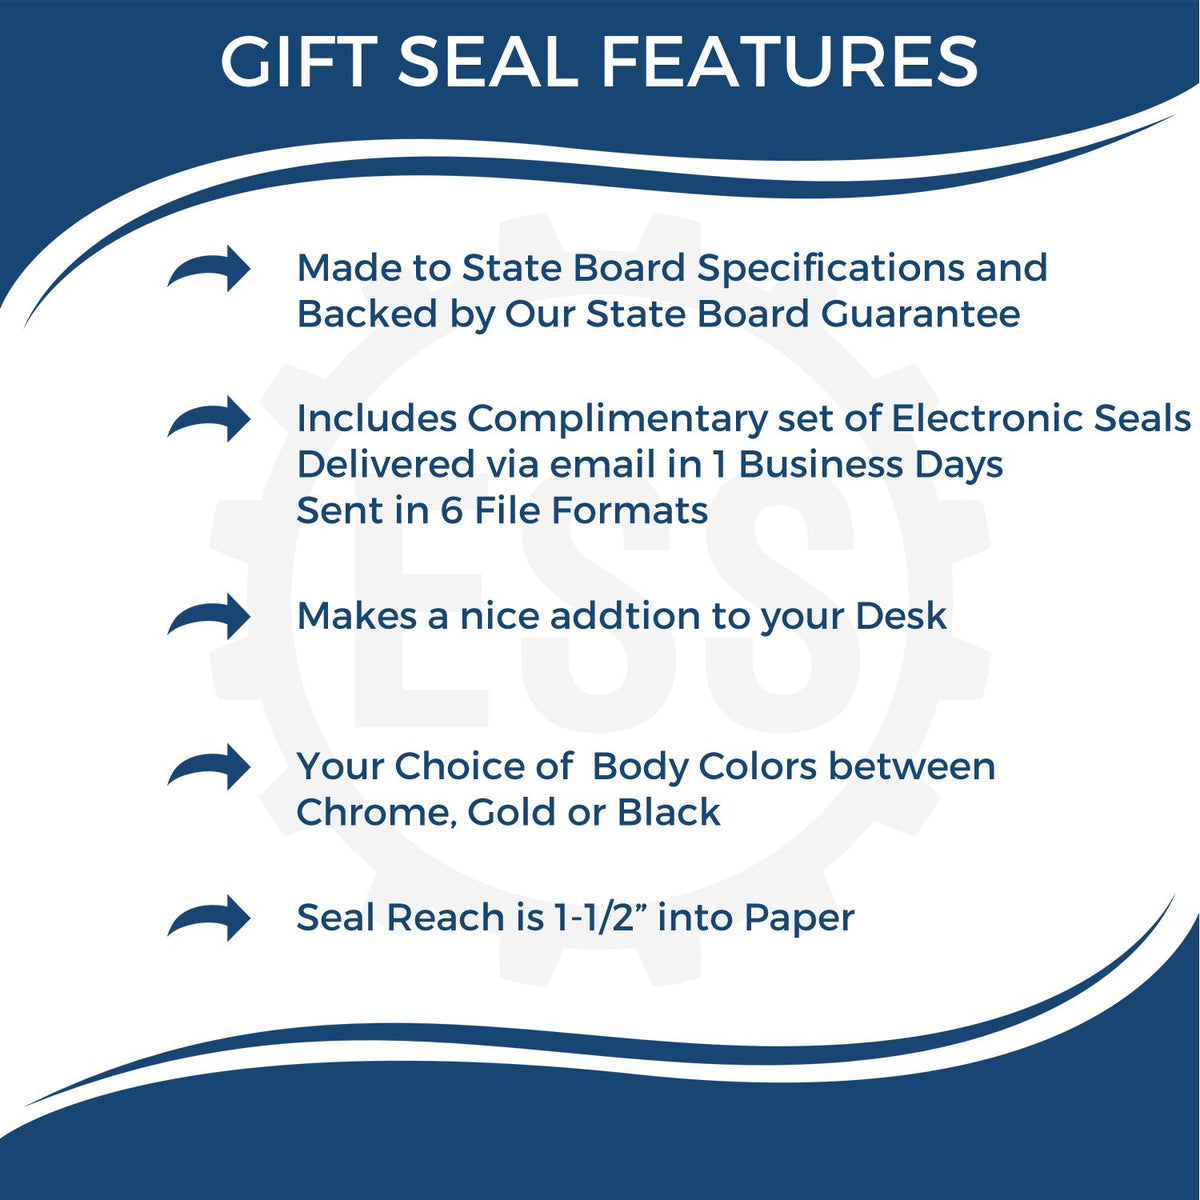 A picture of an infographic highlighting the selling points for the Gift Tennessee Engineer Seal